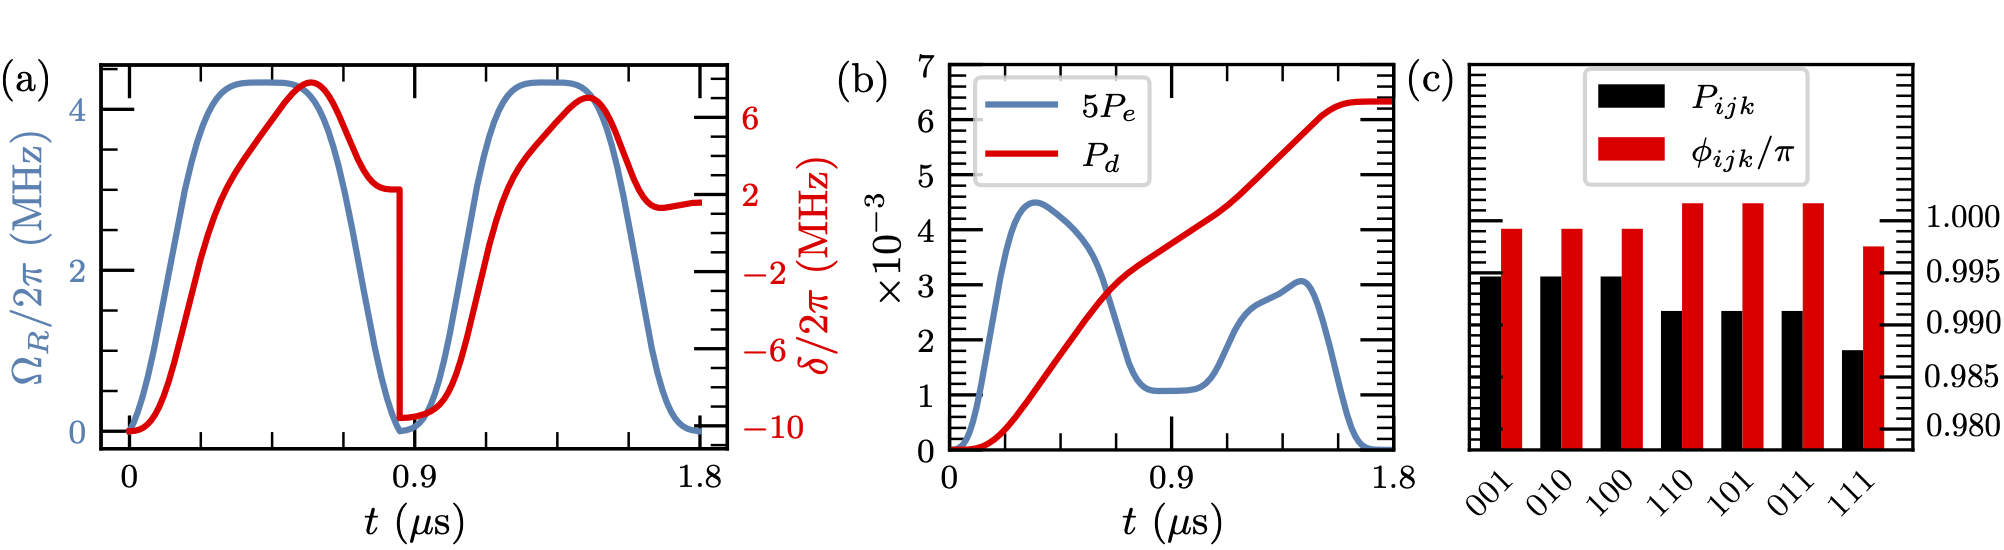 Three atom CCZ gate We show (a) optimal pulse parameters for the CCZ gate, (b) leakage errors from spontaneous decay and excitation of the intermediate excited state (c) Resulting phase and amplitude of the optimal gate sequence.